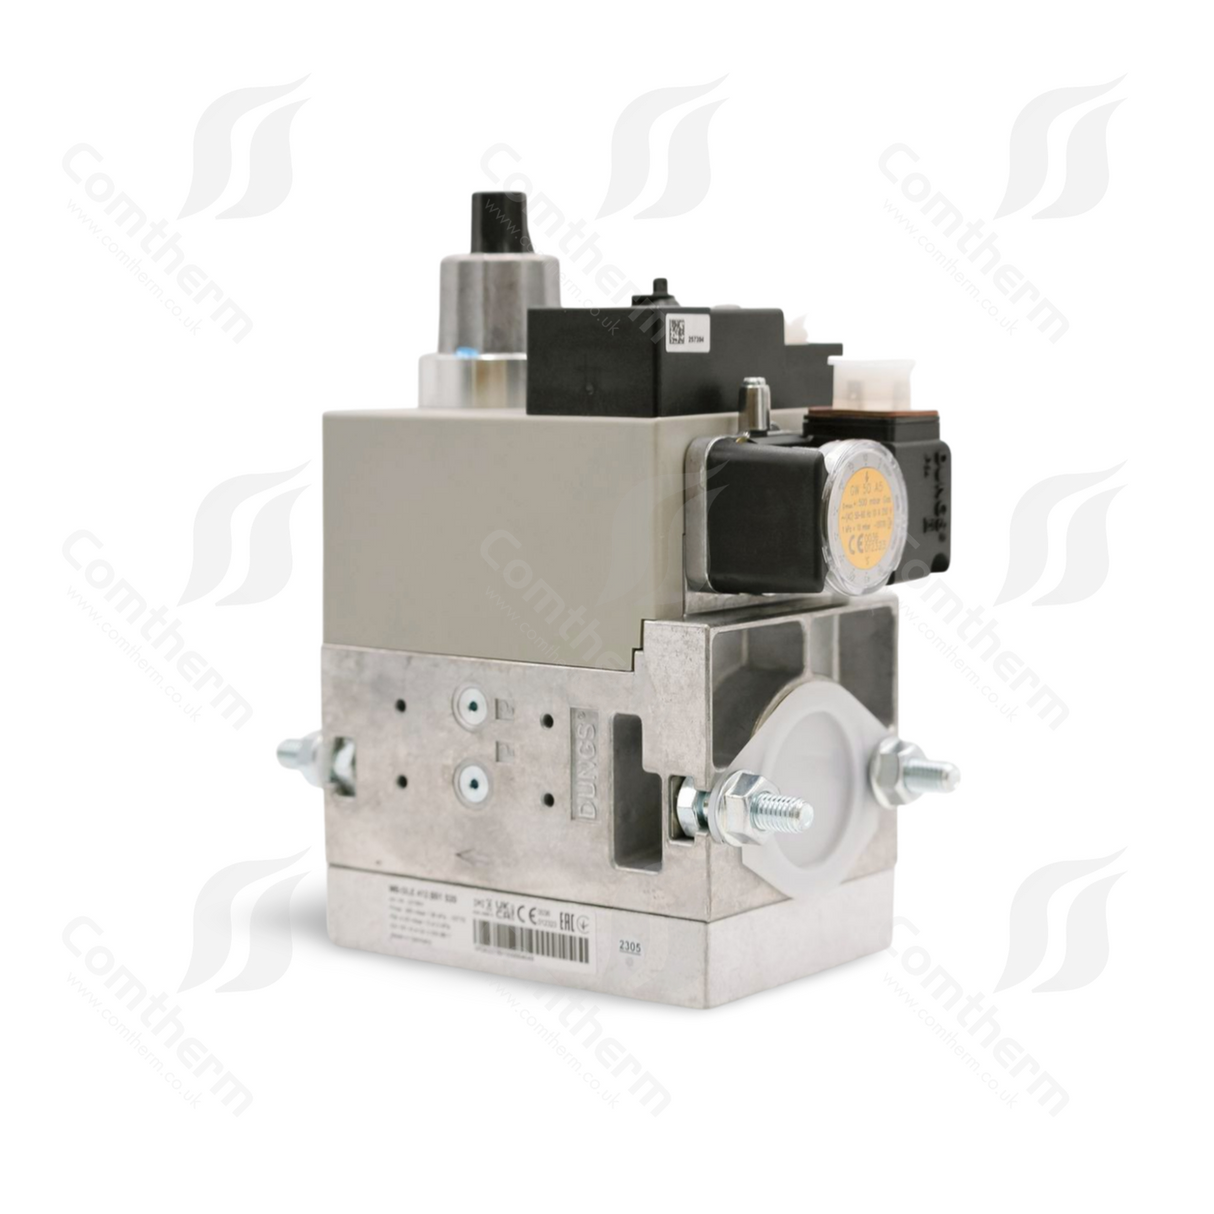 Dungs MB-DLE 412 B01 S50 + GW150A5 Multibloc Gas Valve - 110v